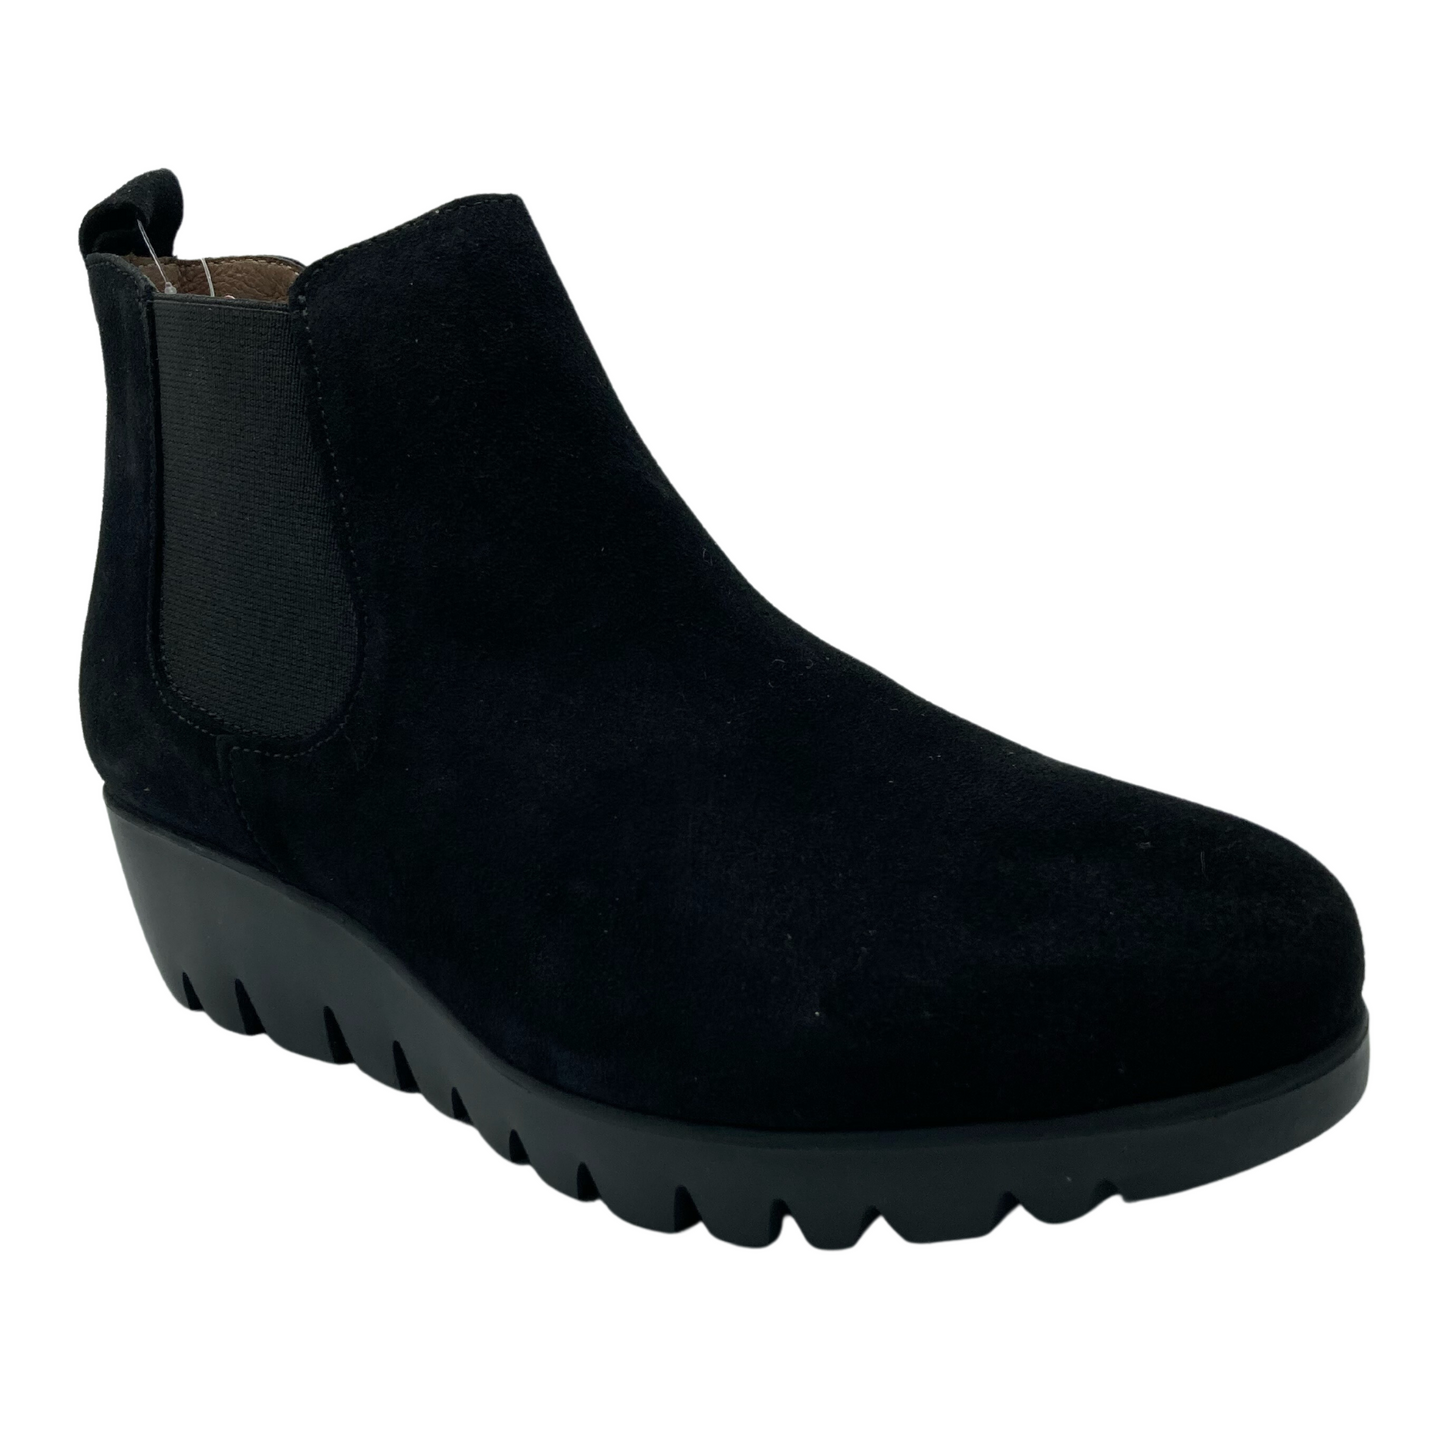 45 degree angled view of black suede ankle boot with elastic side gore and rubber wedge heel